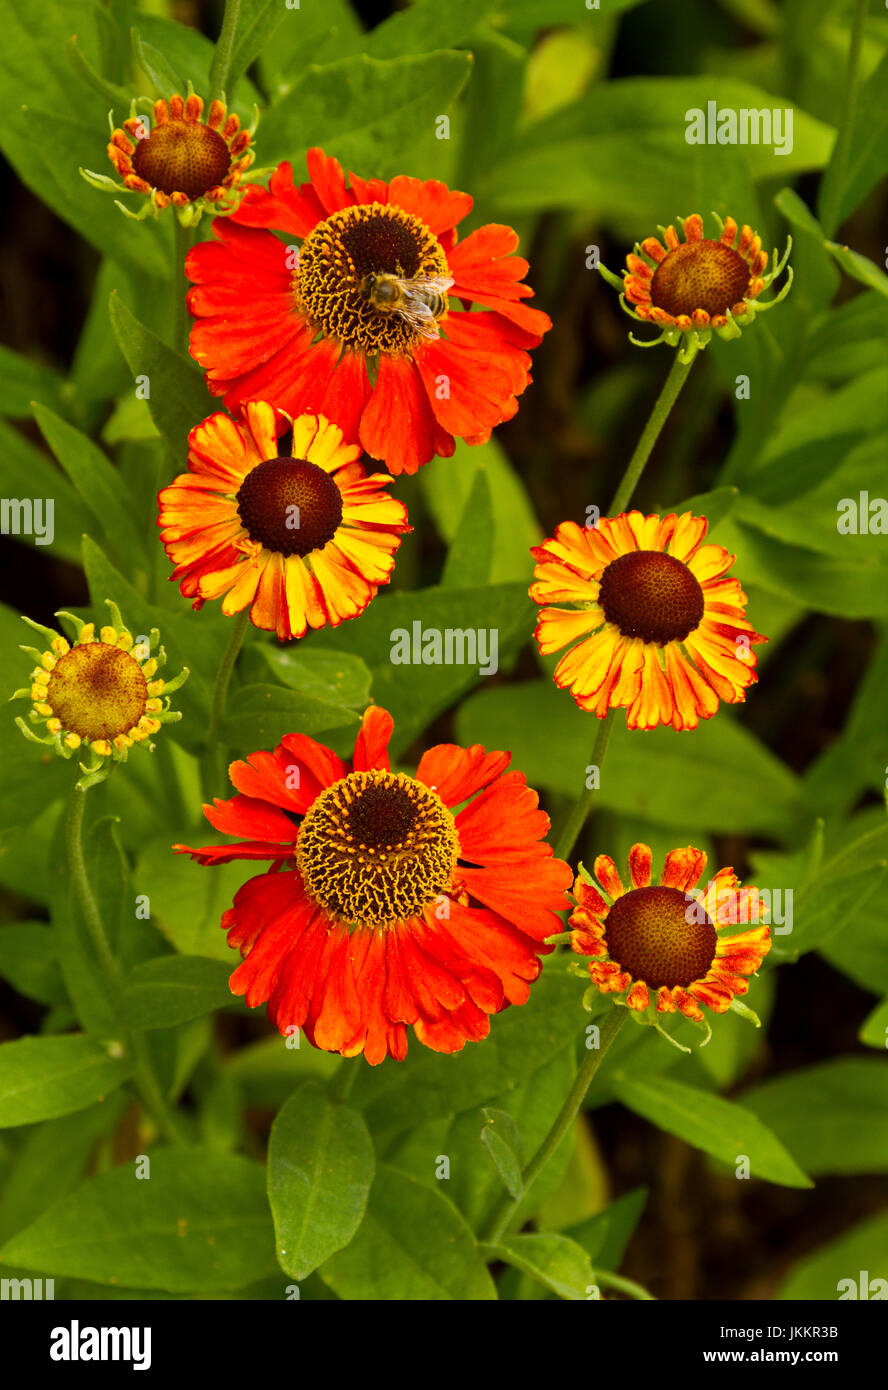 Cluster of vivid orange / red flowers of Helenium 'Mardi Gras' against a background of green foliage Stock Photo